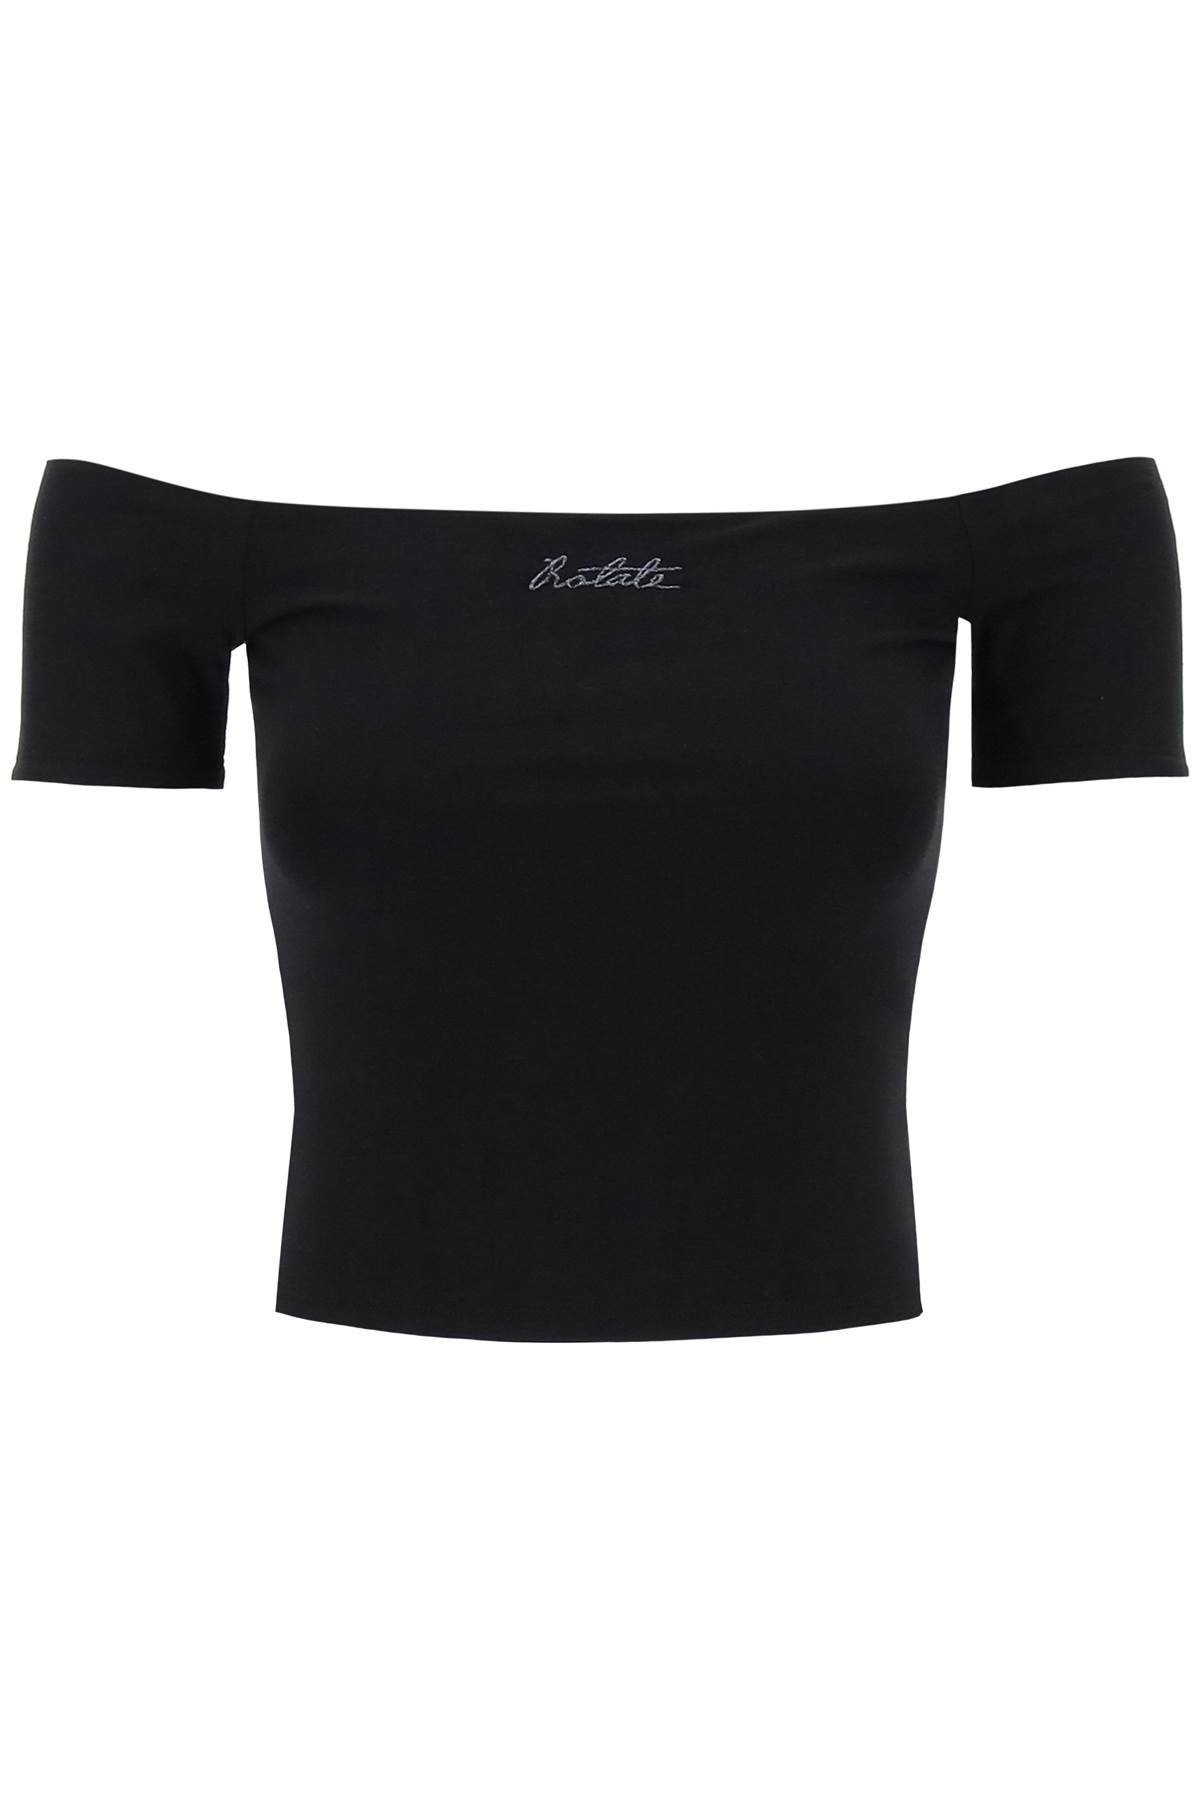 Rotate ROTATE off-shoulder t-shirt with embroidered lure